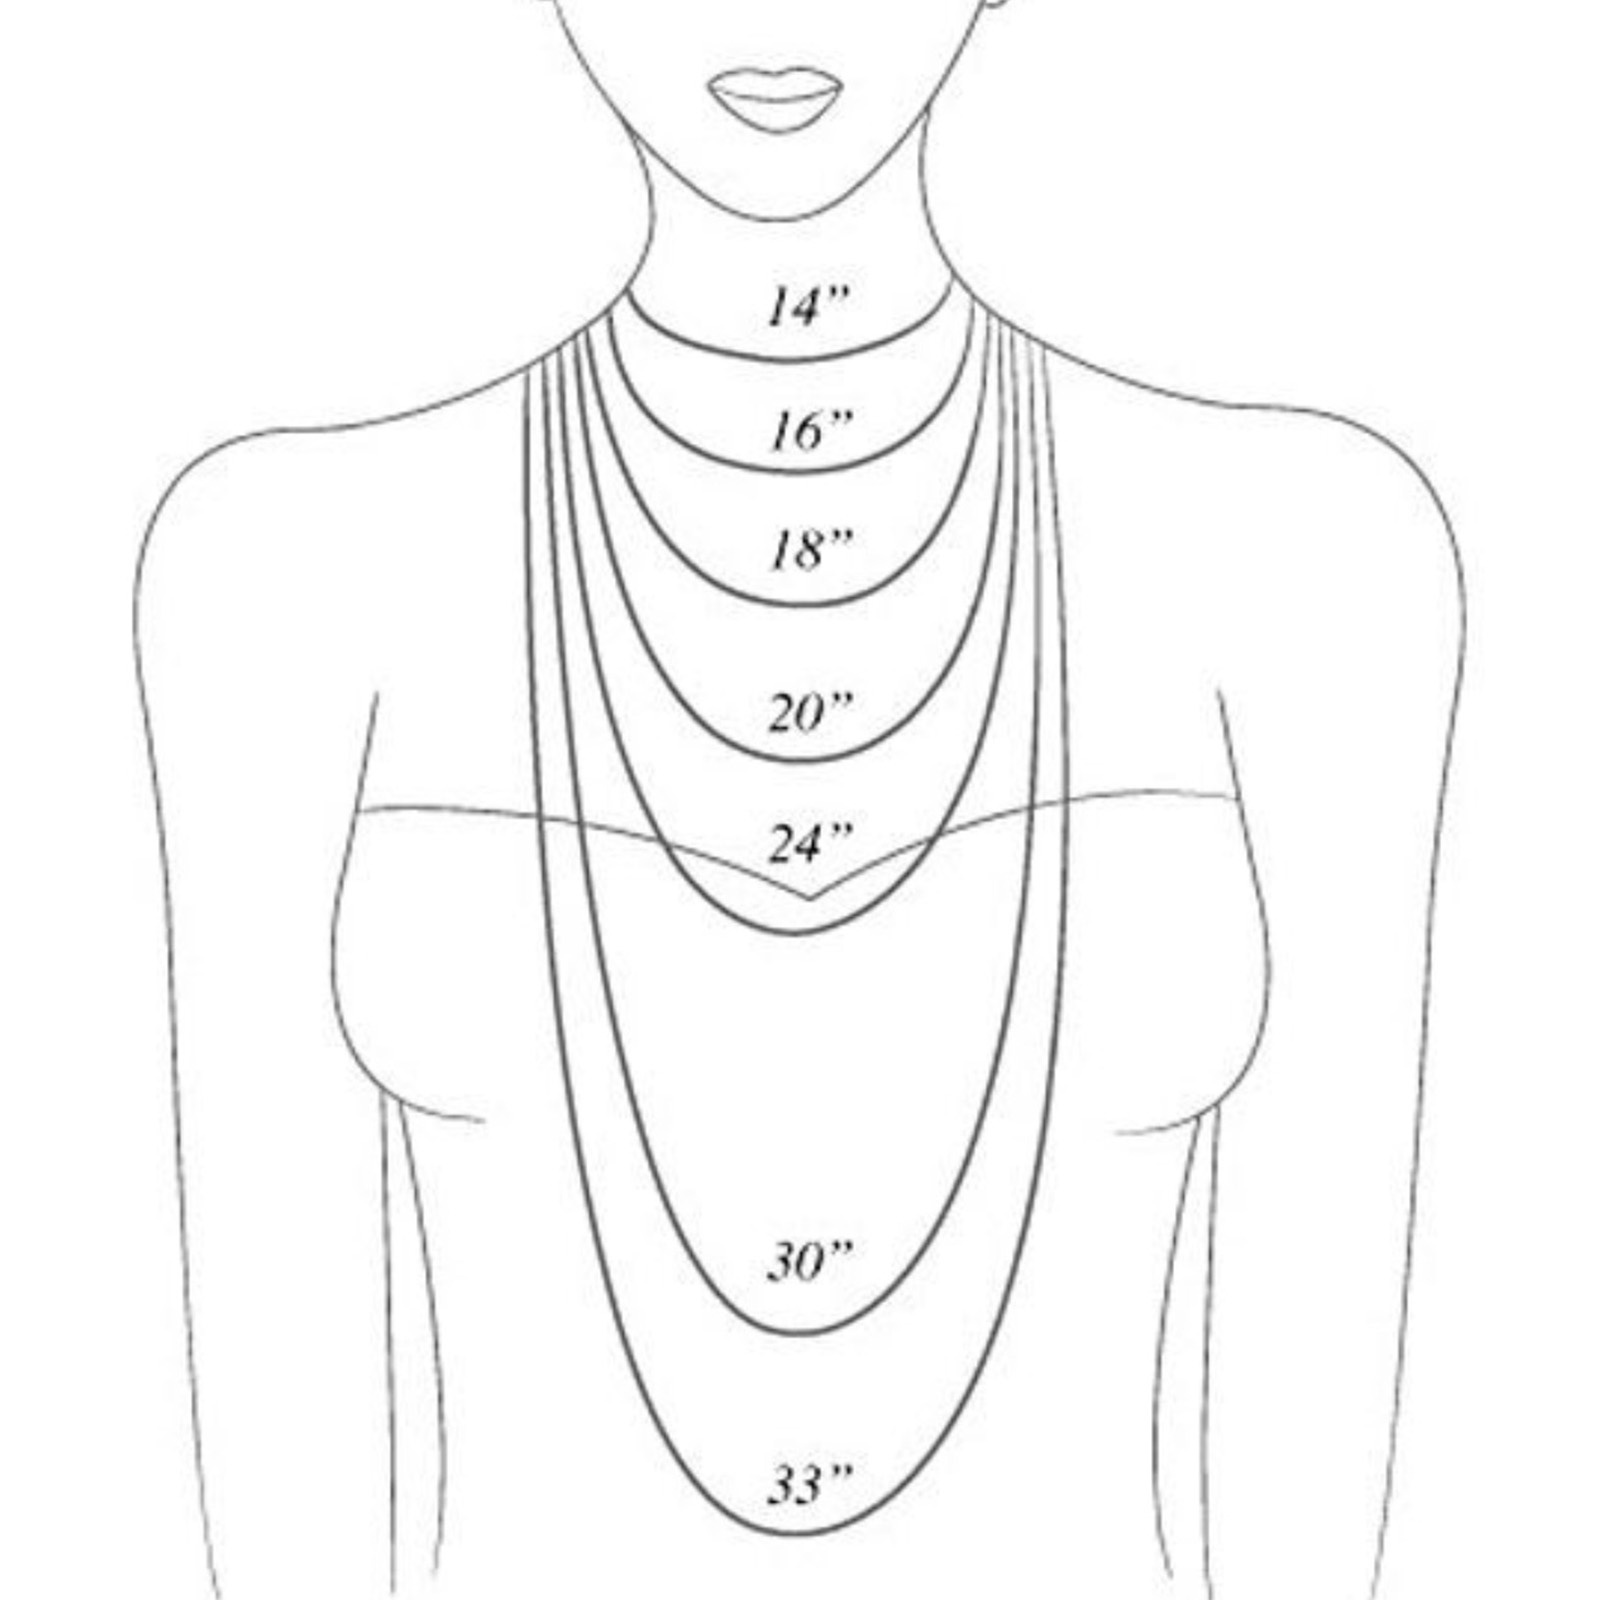 Necklace Length Guide in "The Mother of a Guide to Selecting Wedding Jewelry" by Cynthia Renée.